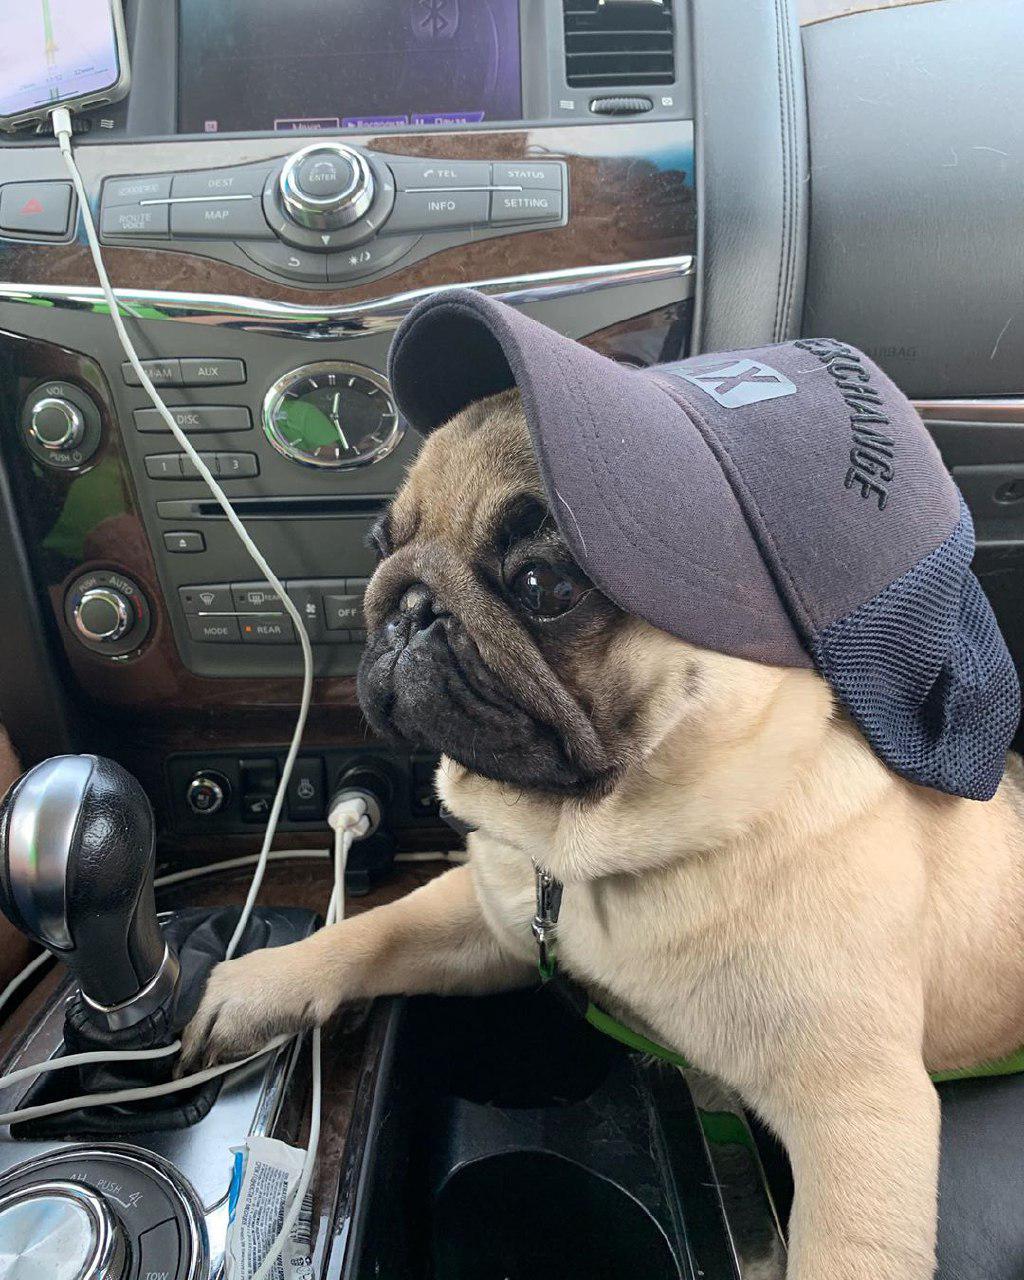 Pug wearing a cap while lying in the passenger seat inside the car